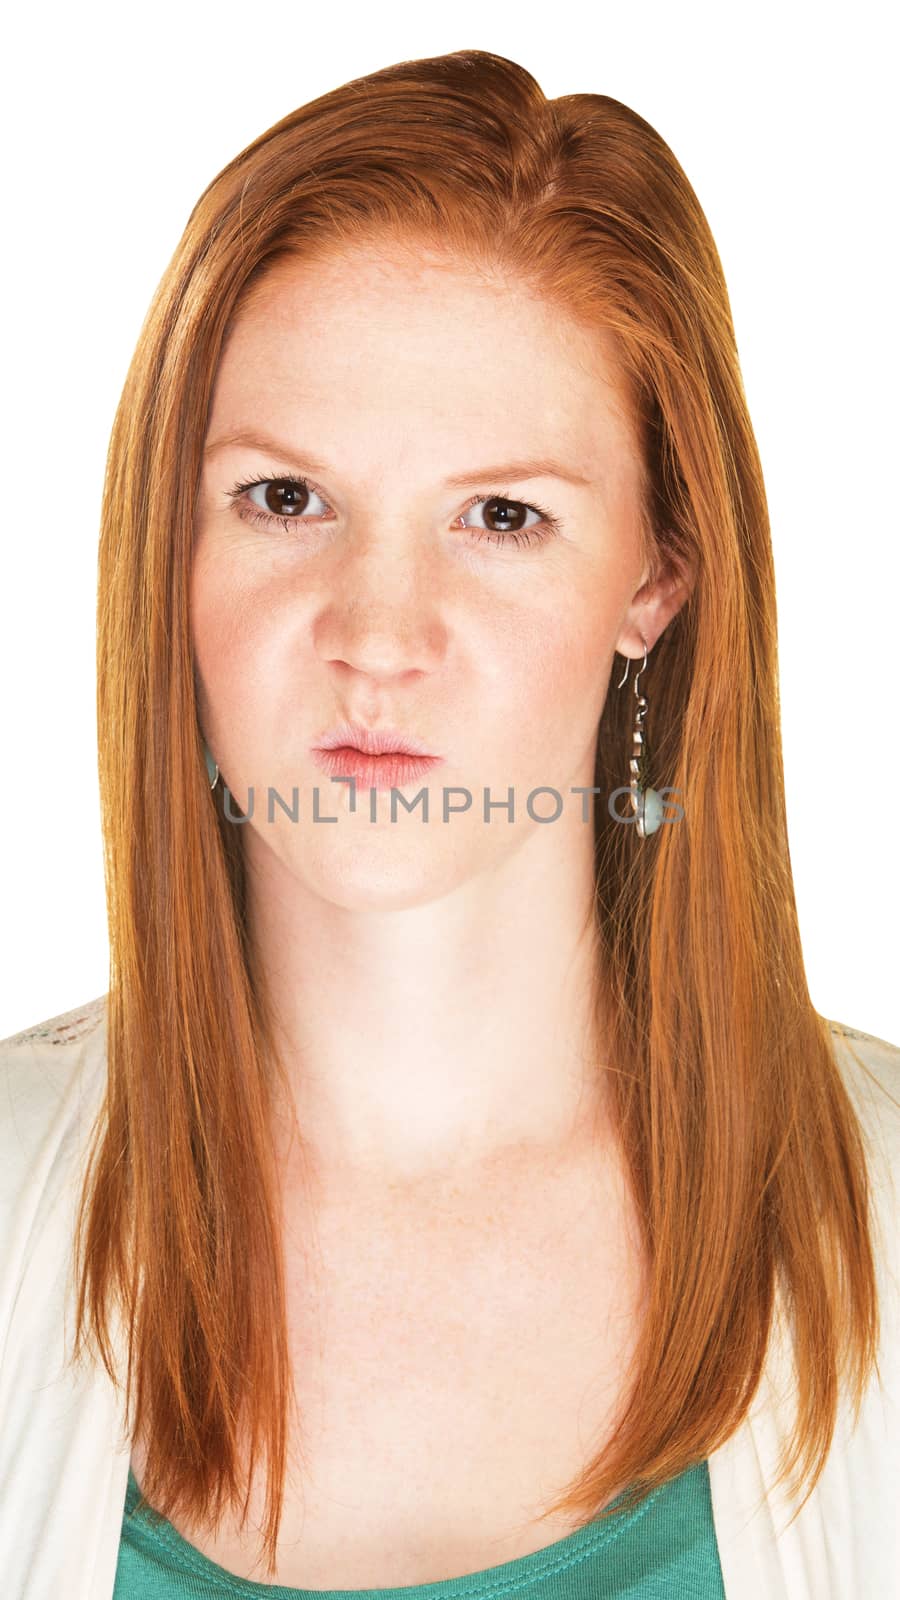 Isolated angry person with puckered lips over white